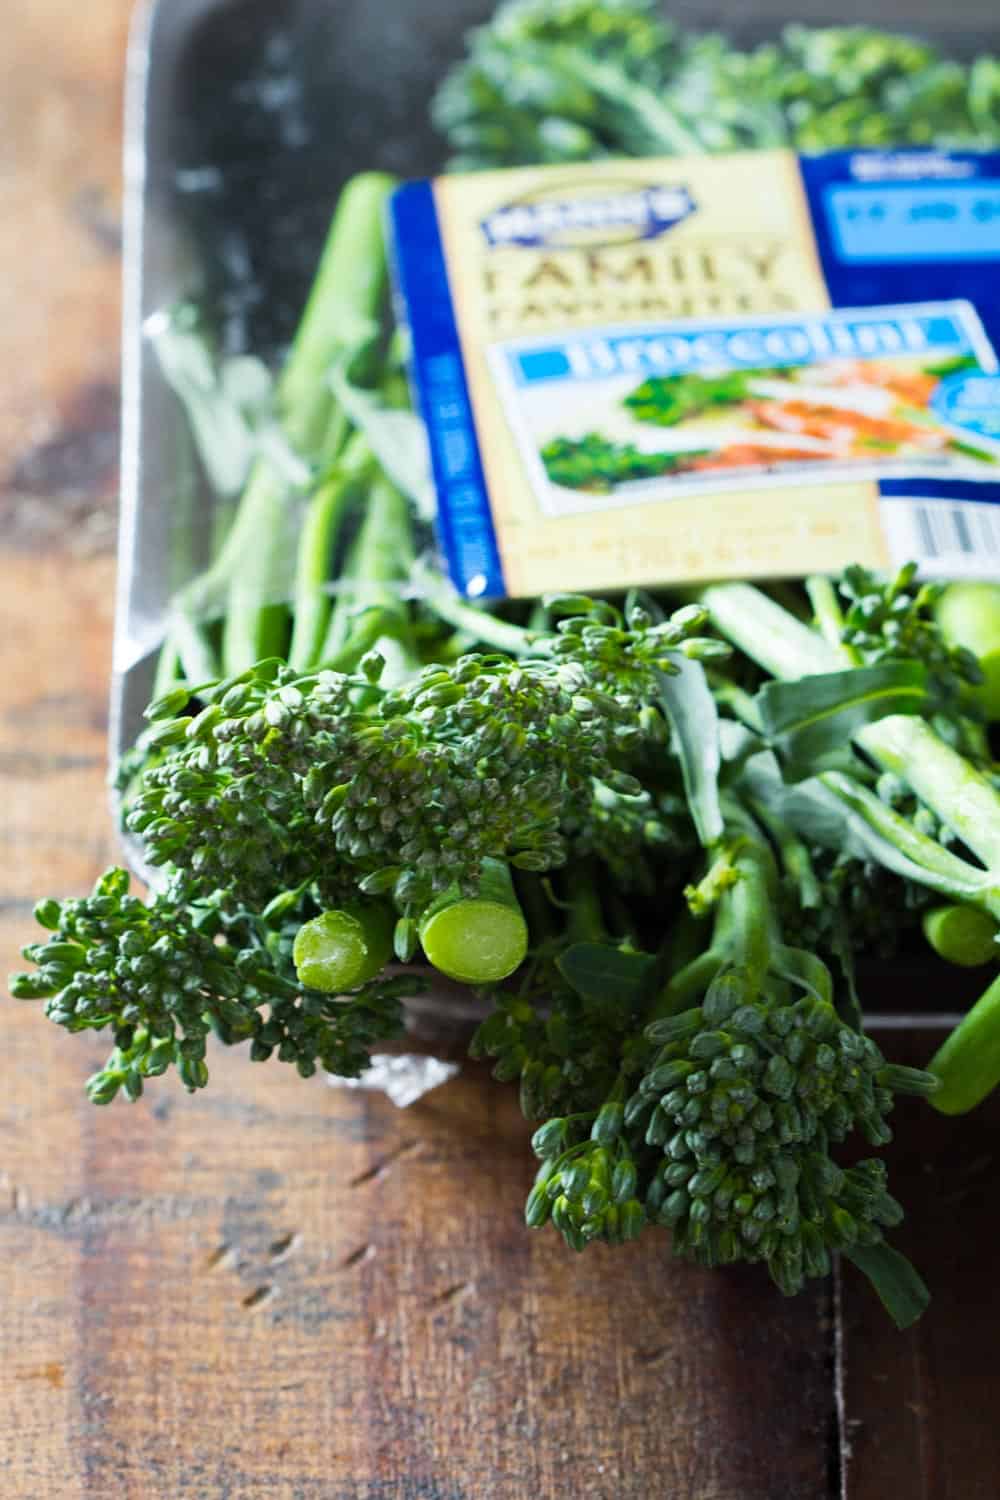 Close up of broccolini branches from an opened Mann's broccolini package